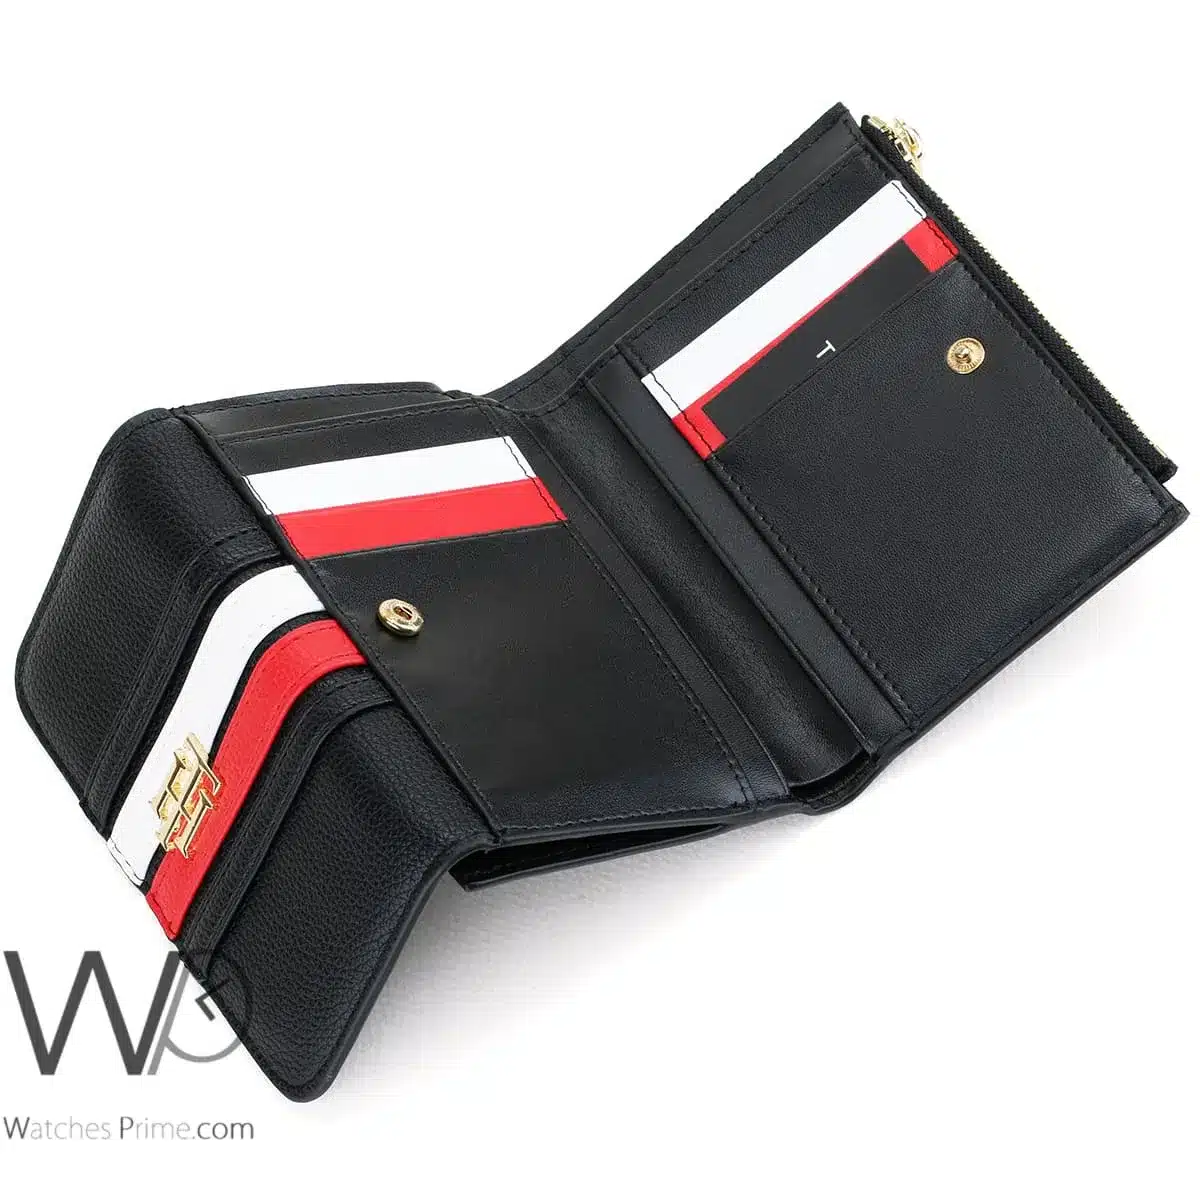 Tommy Hilfiger TH Wallet Leather Black Women | Watches Prime